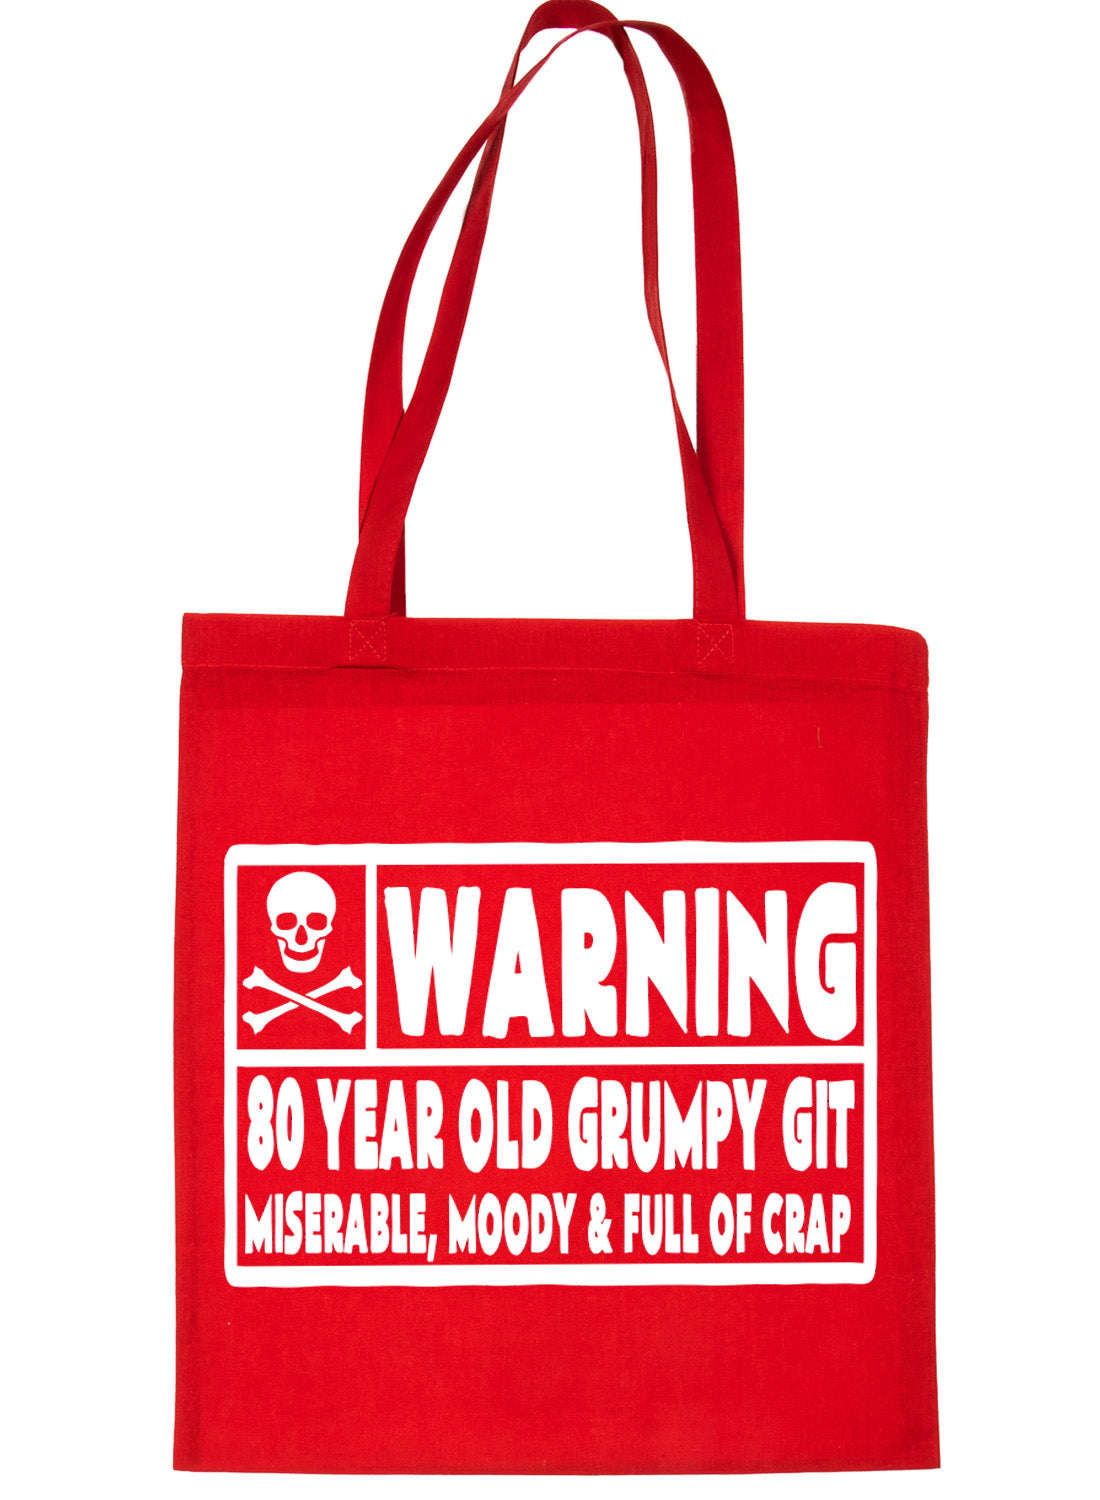 80 Year Old Git 80th Birthday Present Shopping Tote Bag Ladies Gift